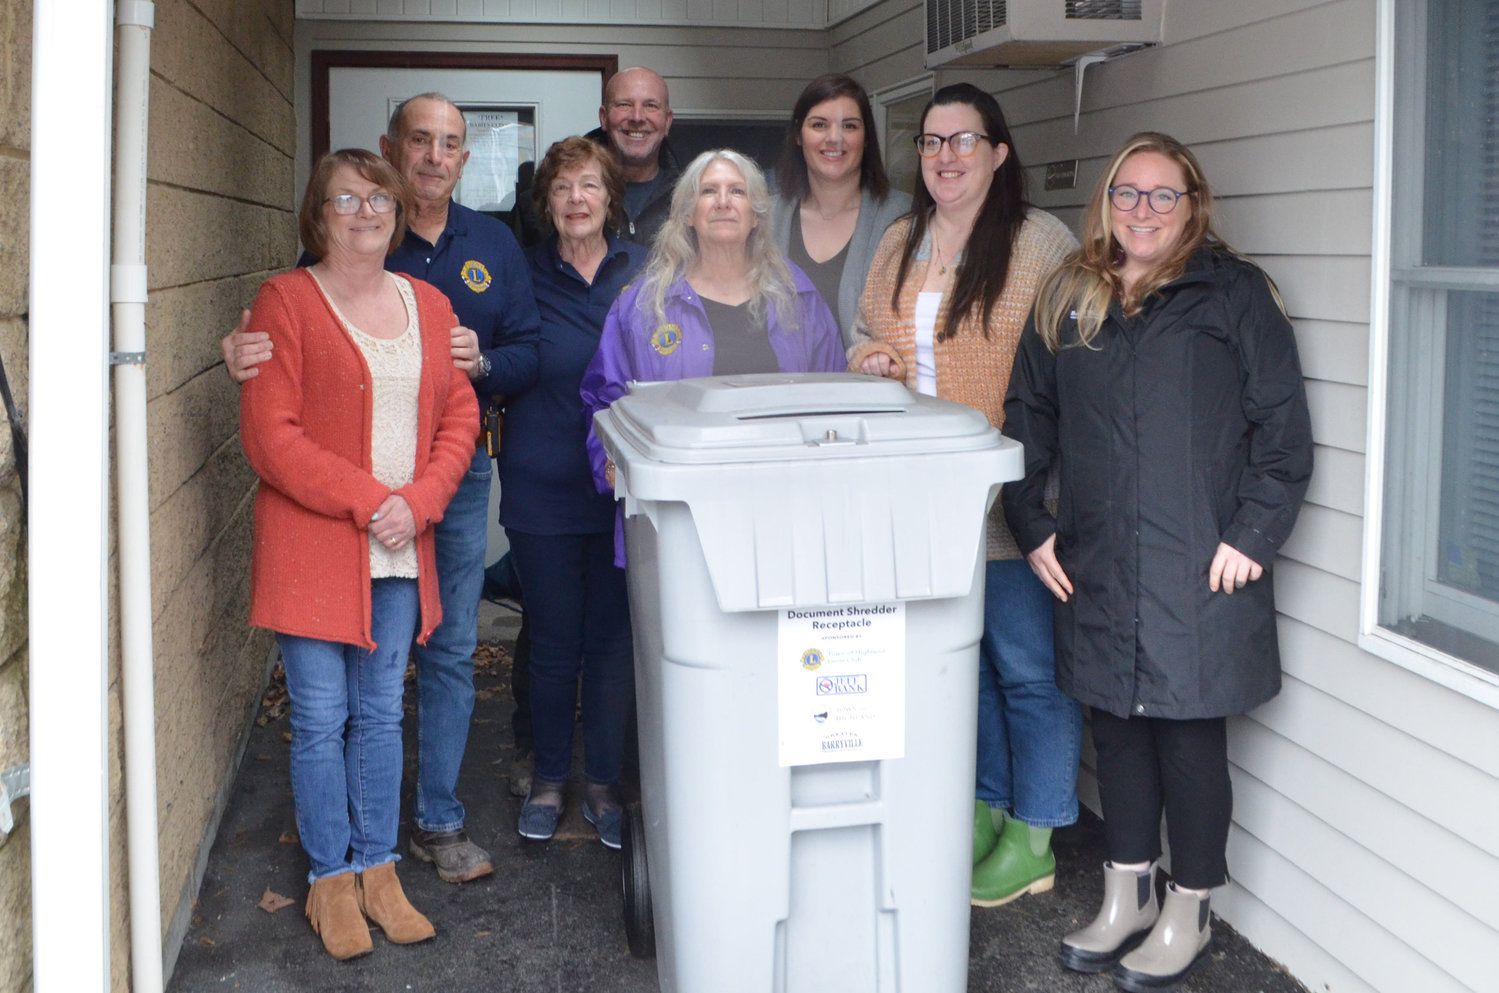 Representing the donors behind the Town of Highland shredder project, town clerk Sue Hoffman, left, Lions Club members Tony LaRuffa and Karen Flowers, town council member Chris Tambini, Lions Club president Claudia Bocker, Jeff Bank representative Jill Bertot, town council member Kaitlin Haas and Greater Barryville Chamber of Commerce secretary Laura Burrell.